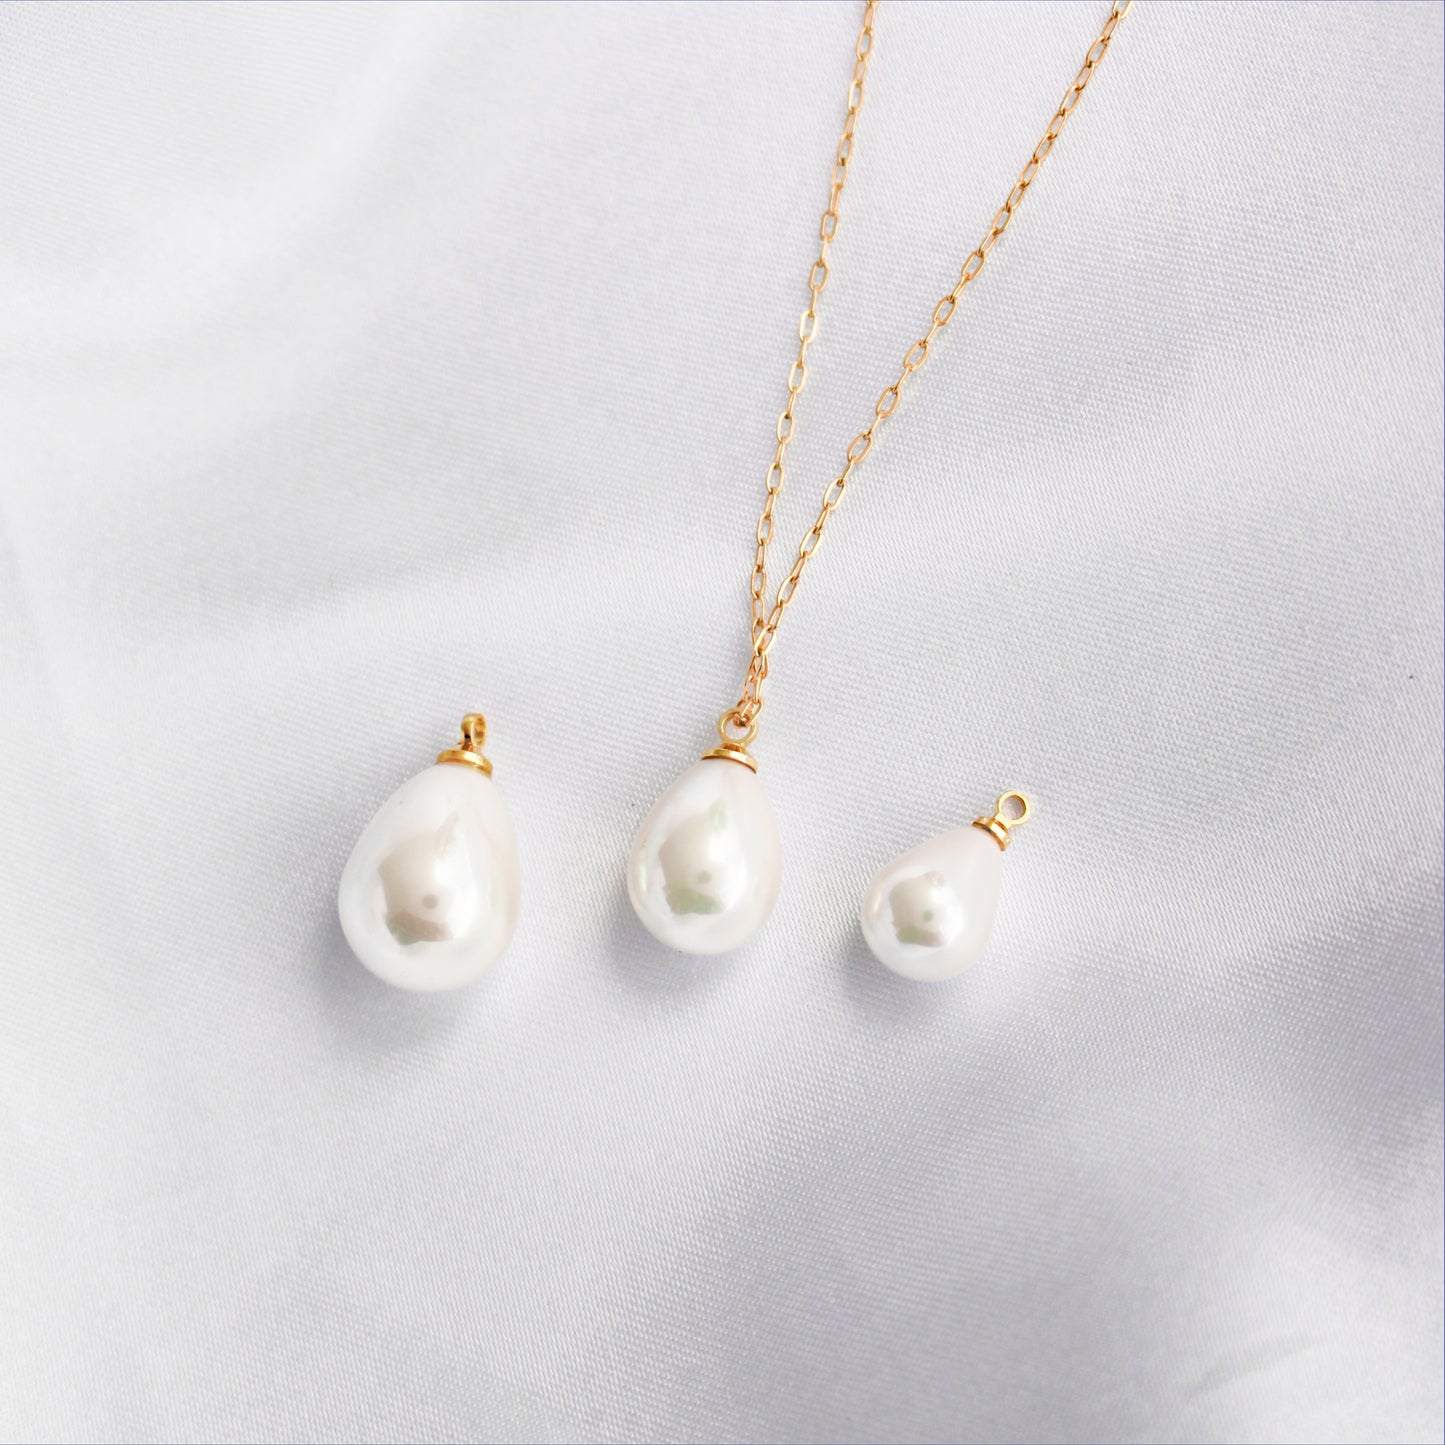 LYLA - 14K Gold Filled Drop Pearl Necklace For Her ∙ Bridal Necklace ∙ Gift for her ∙ Pearl Jewelry